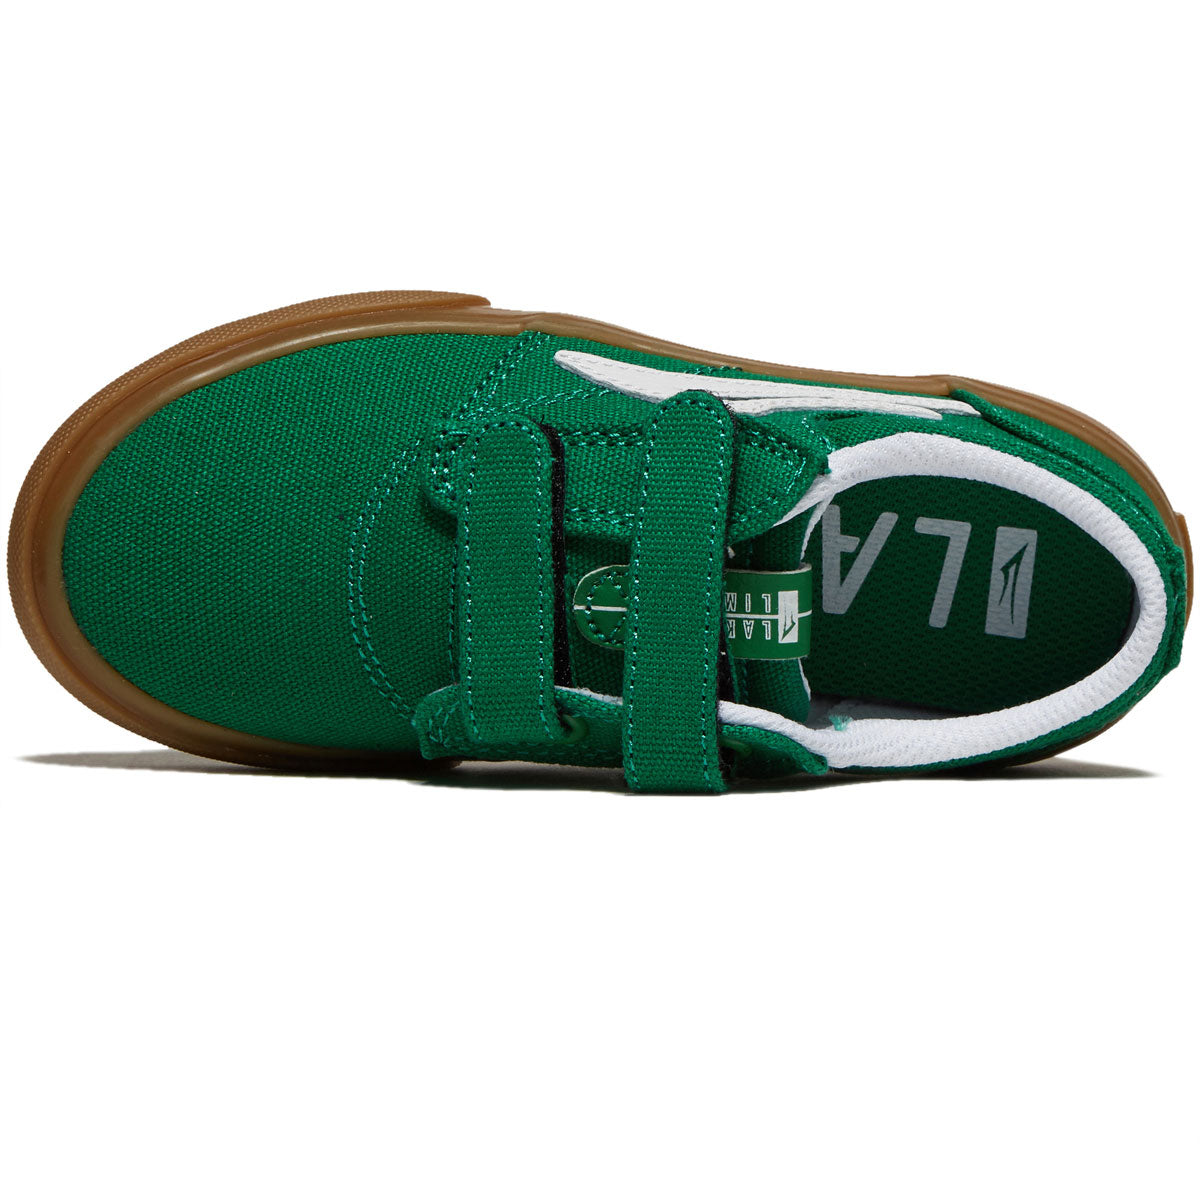 Lakai Youth Griffin Shoes - Green/Gum Canvas image 3